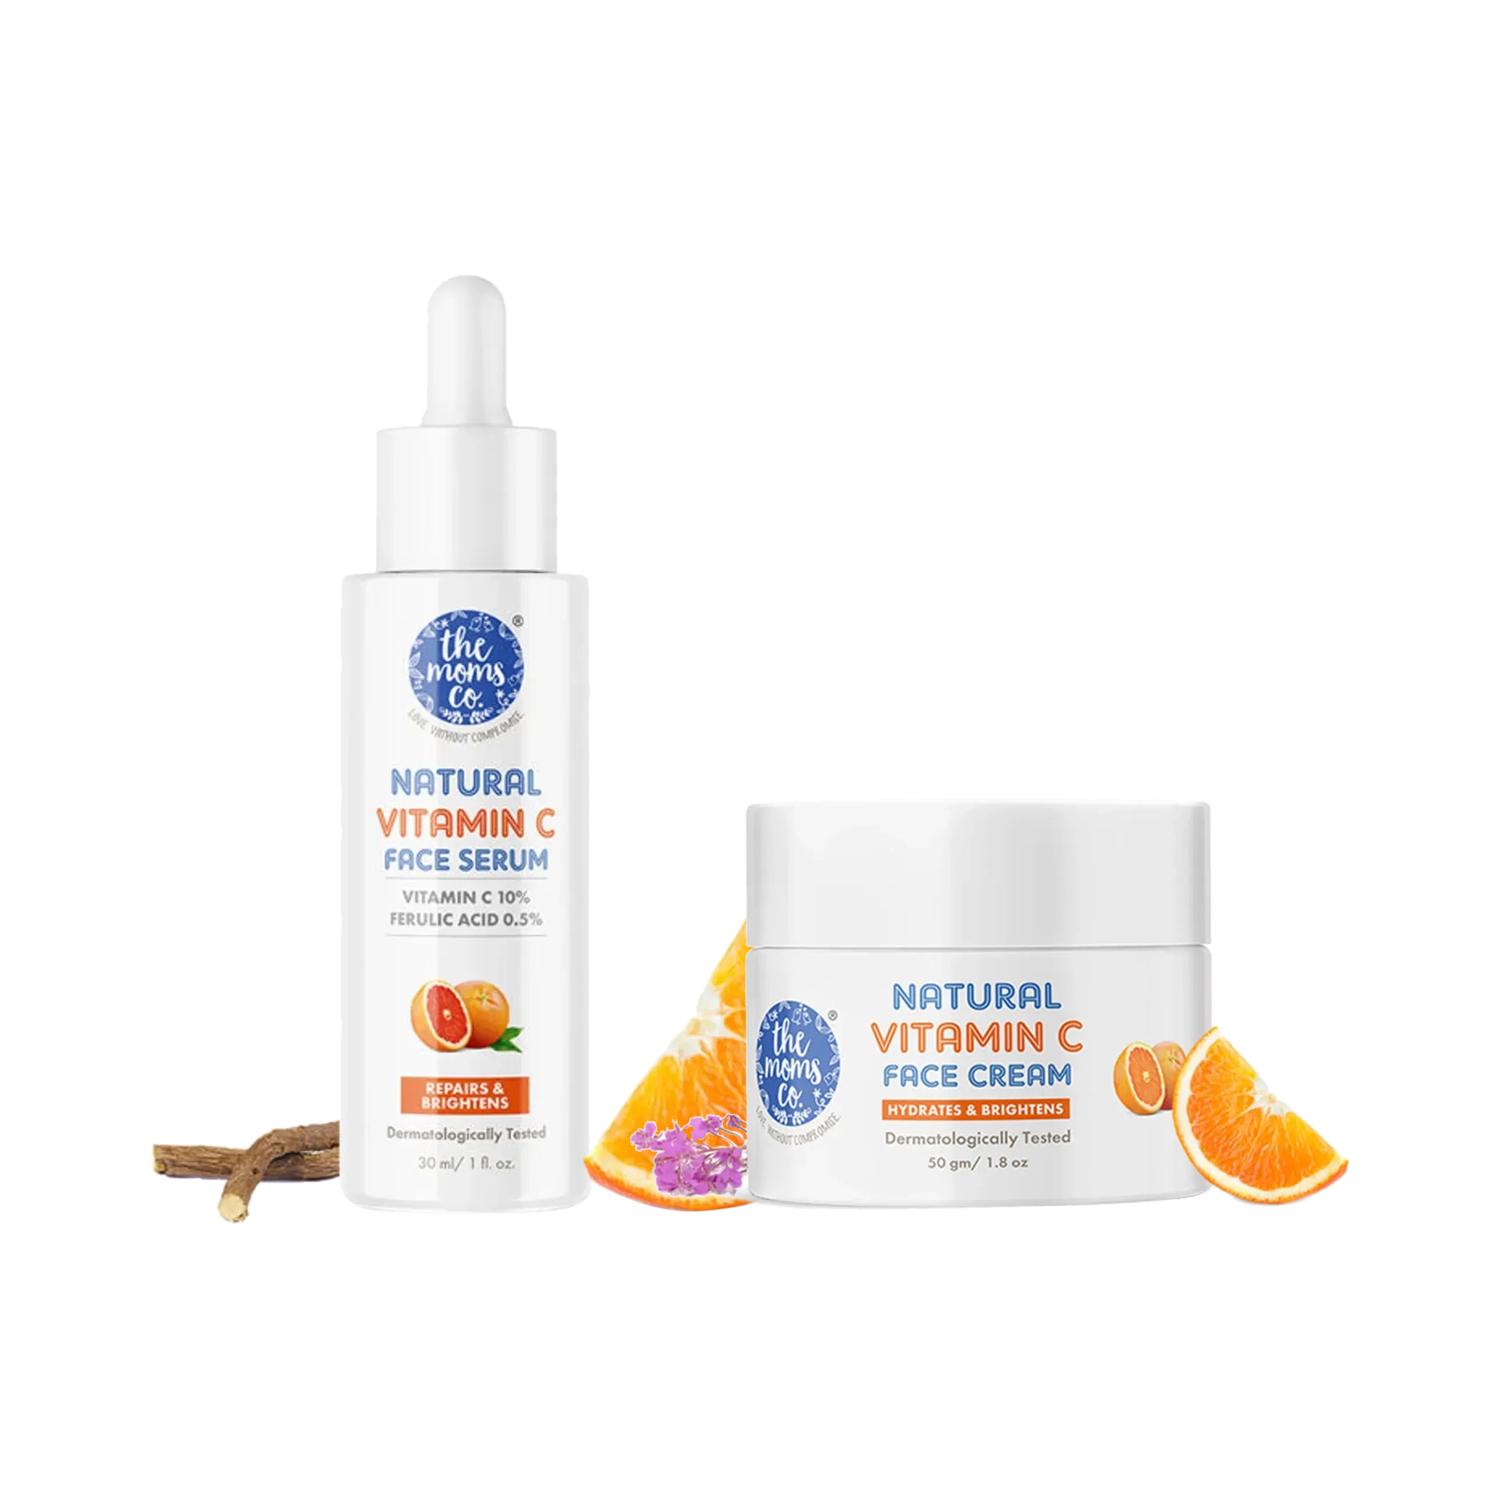 The Mom's Co. | The Mom's Co. Natural Vitamin C Face Cream (50g) & Natural Vitamin C Face Serum (30ml) Combo